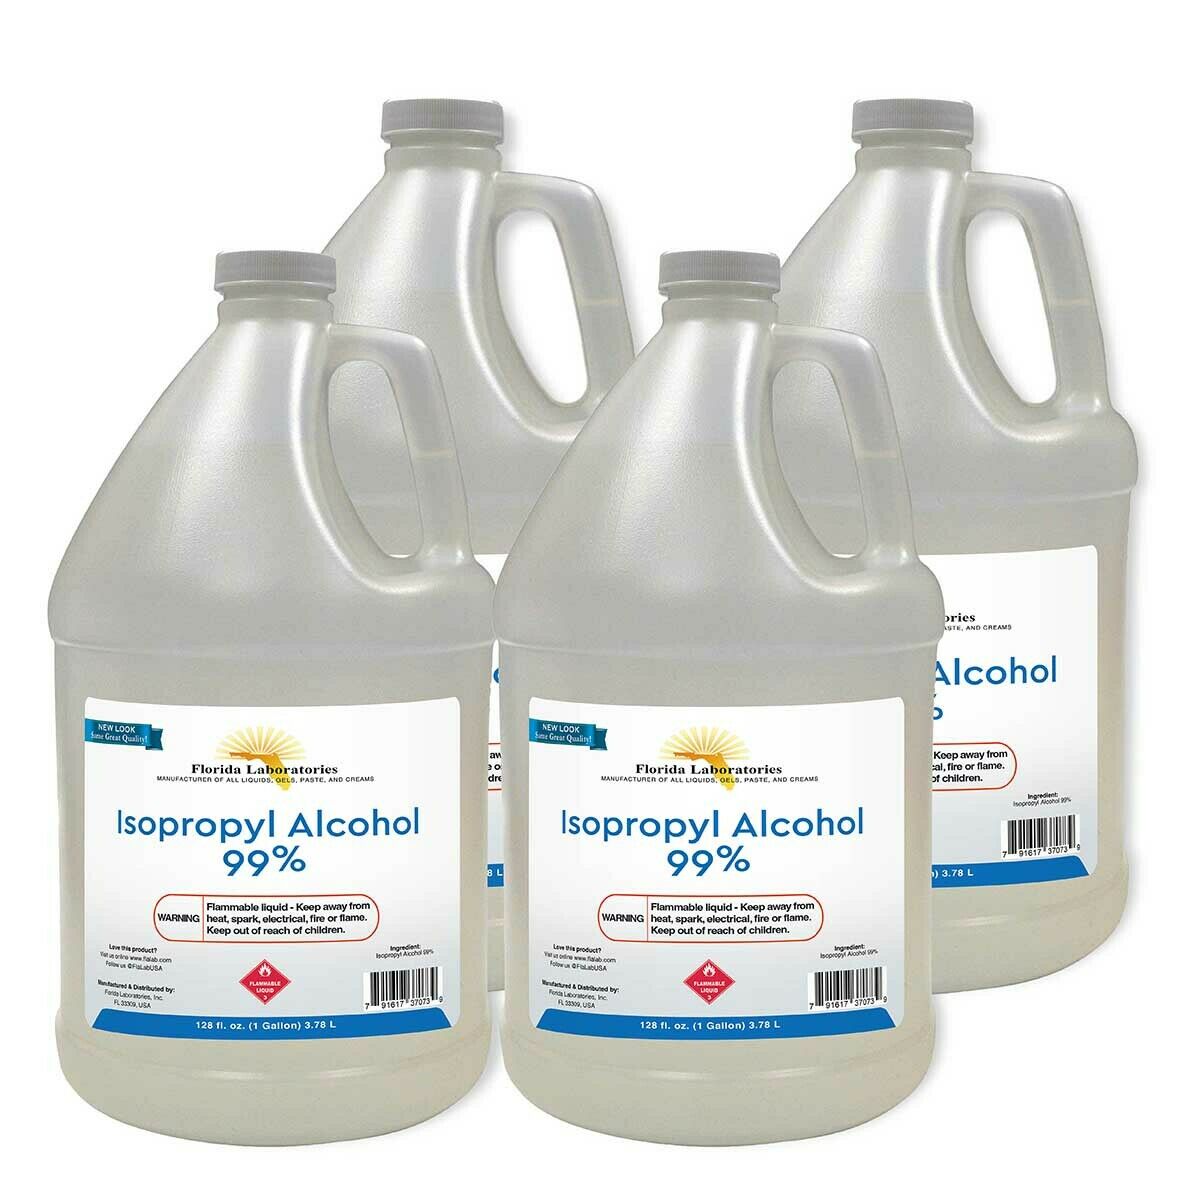 Isopropyl Alcohol 99% High Purity - 4 Gallons - Usa Made - Free Shipping